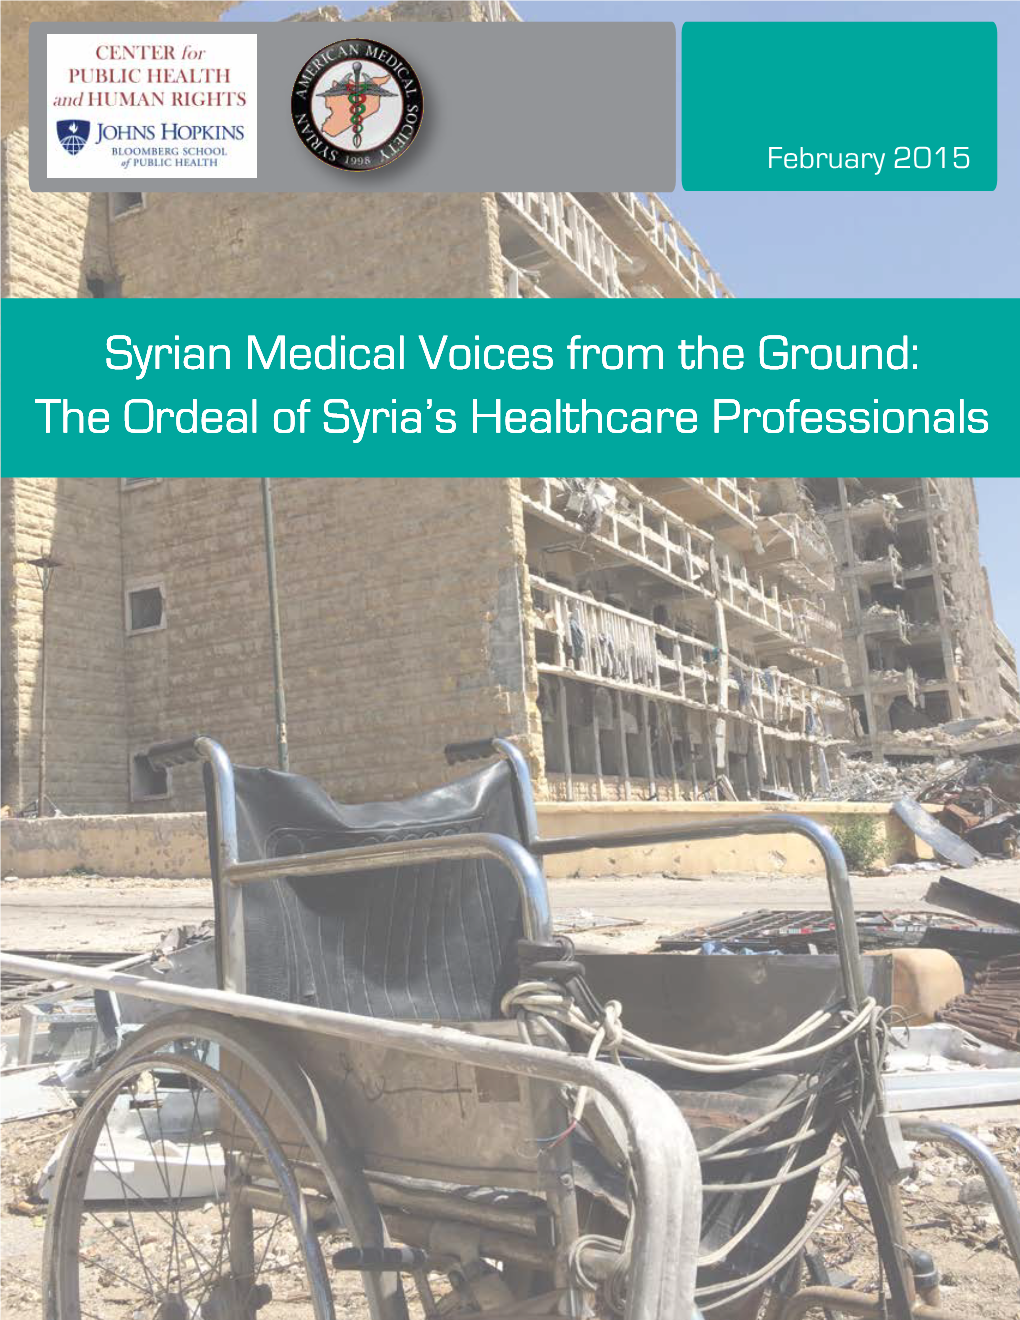 The Ordeal of Syria's Healthcare Professionals